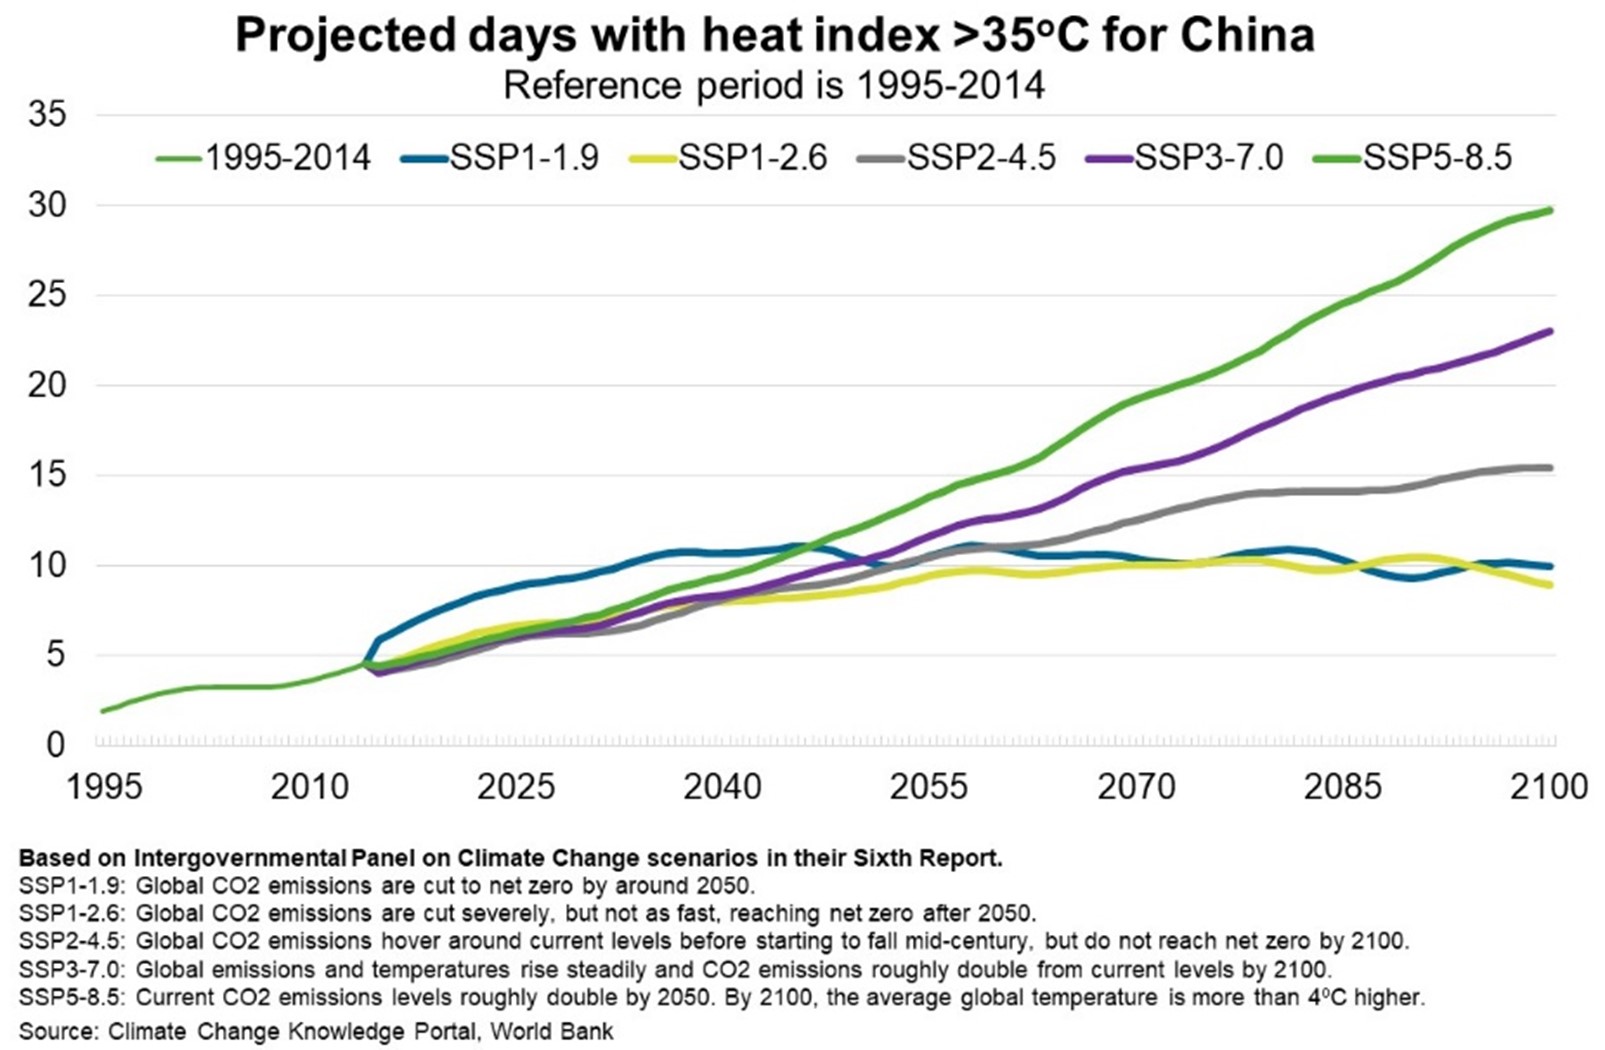 Projected days with heat index >35 degrees for China, reference period is 1995-2014